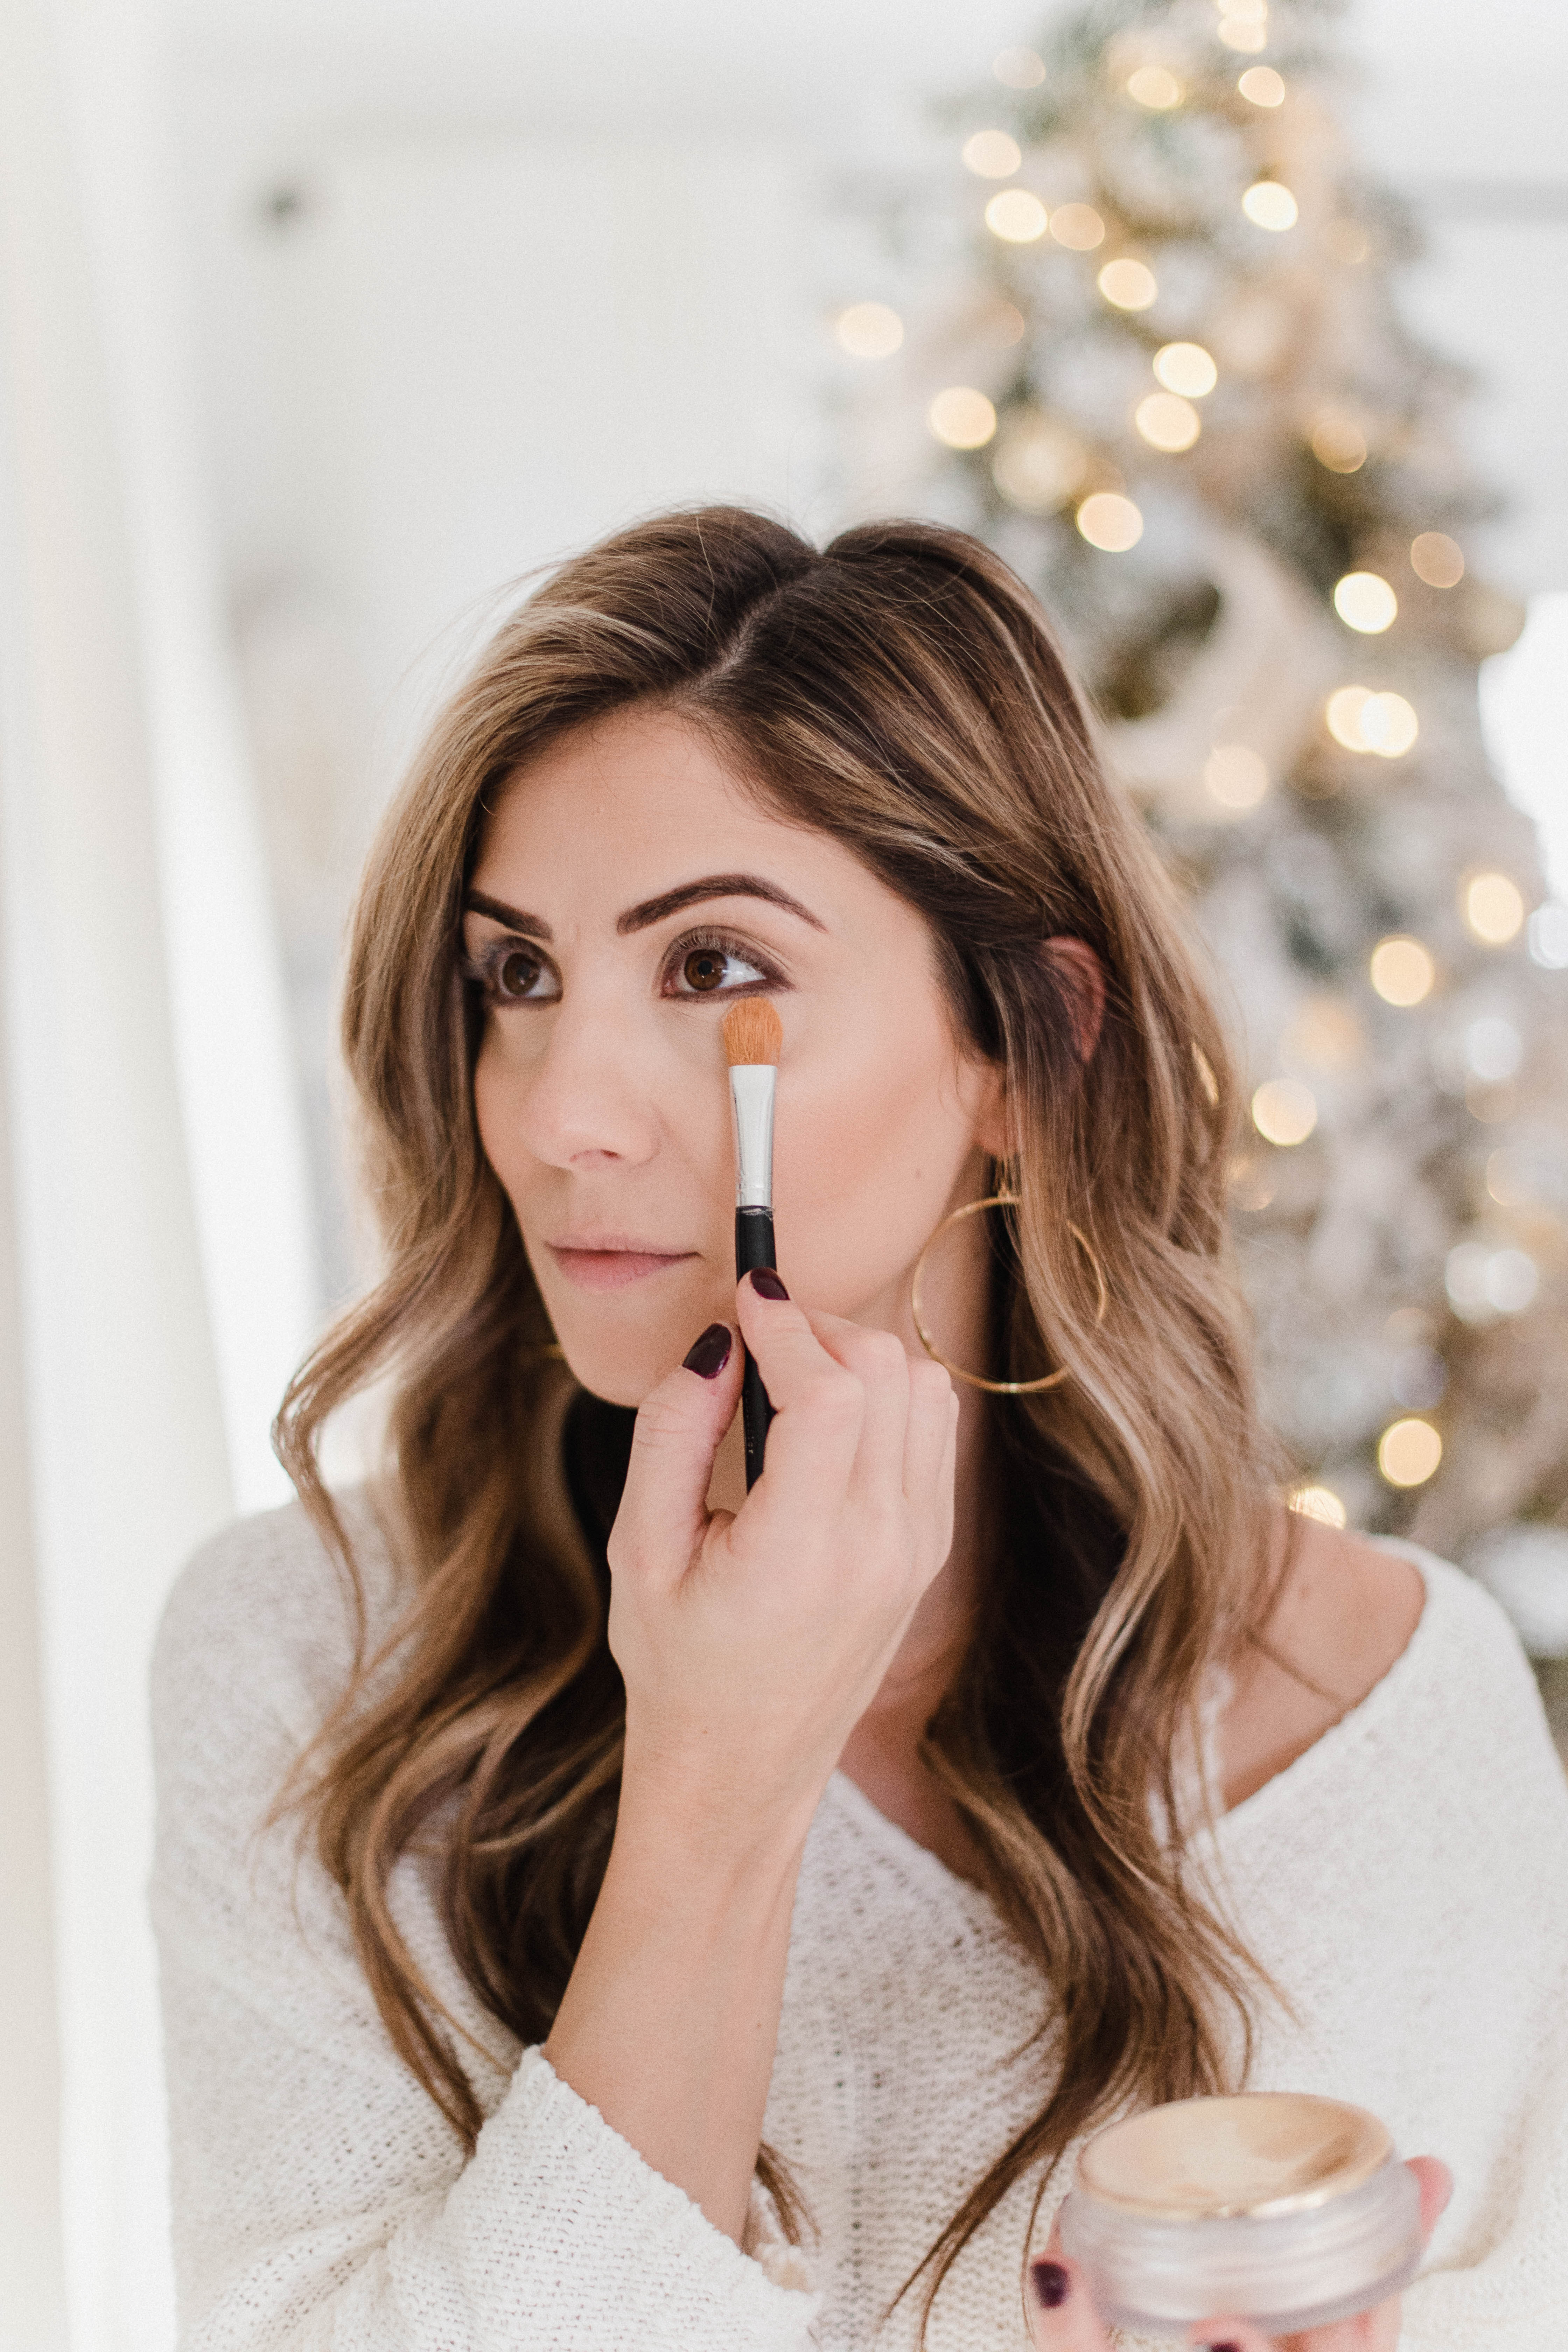 Connecticut life and style blogger Lauren McBride shares two ways she uses setting powder to set her makeup, and a favorite product by Hourglass Cosmetics.